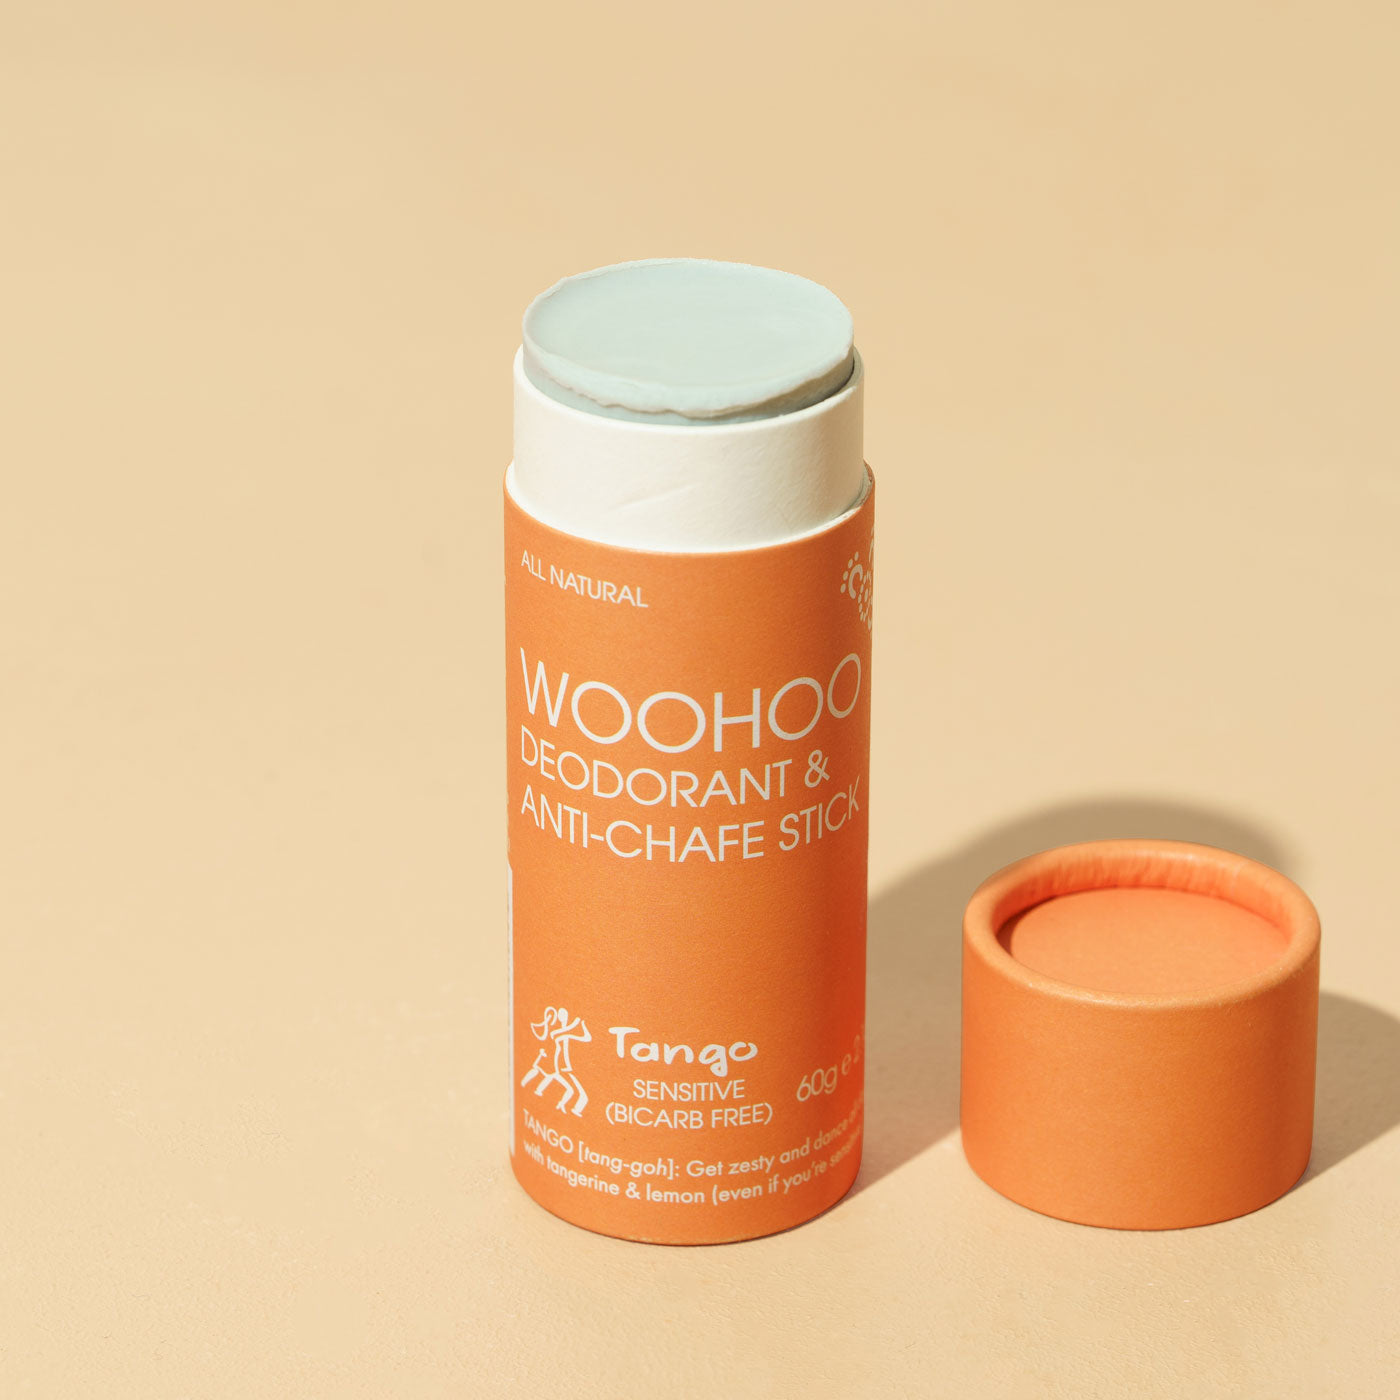 Bar of opened cardboard tube of Woohoo Body's all natural and plastic free deodorant and anti chafe stick. Tango. 